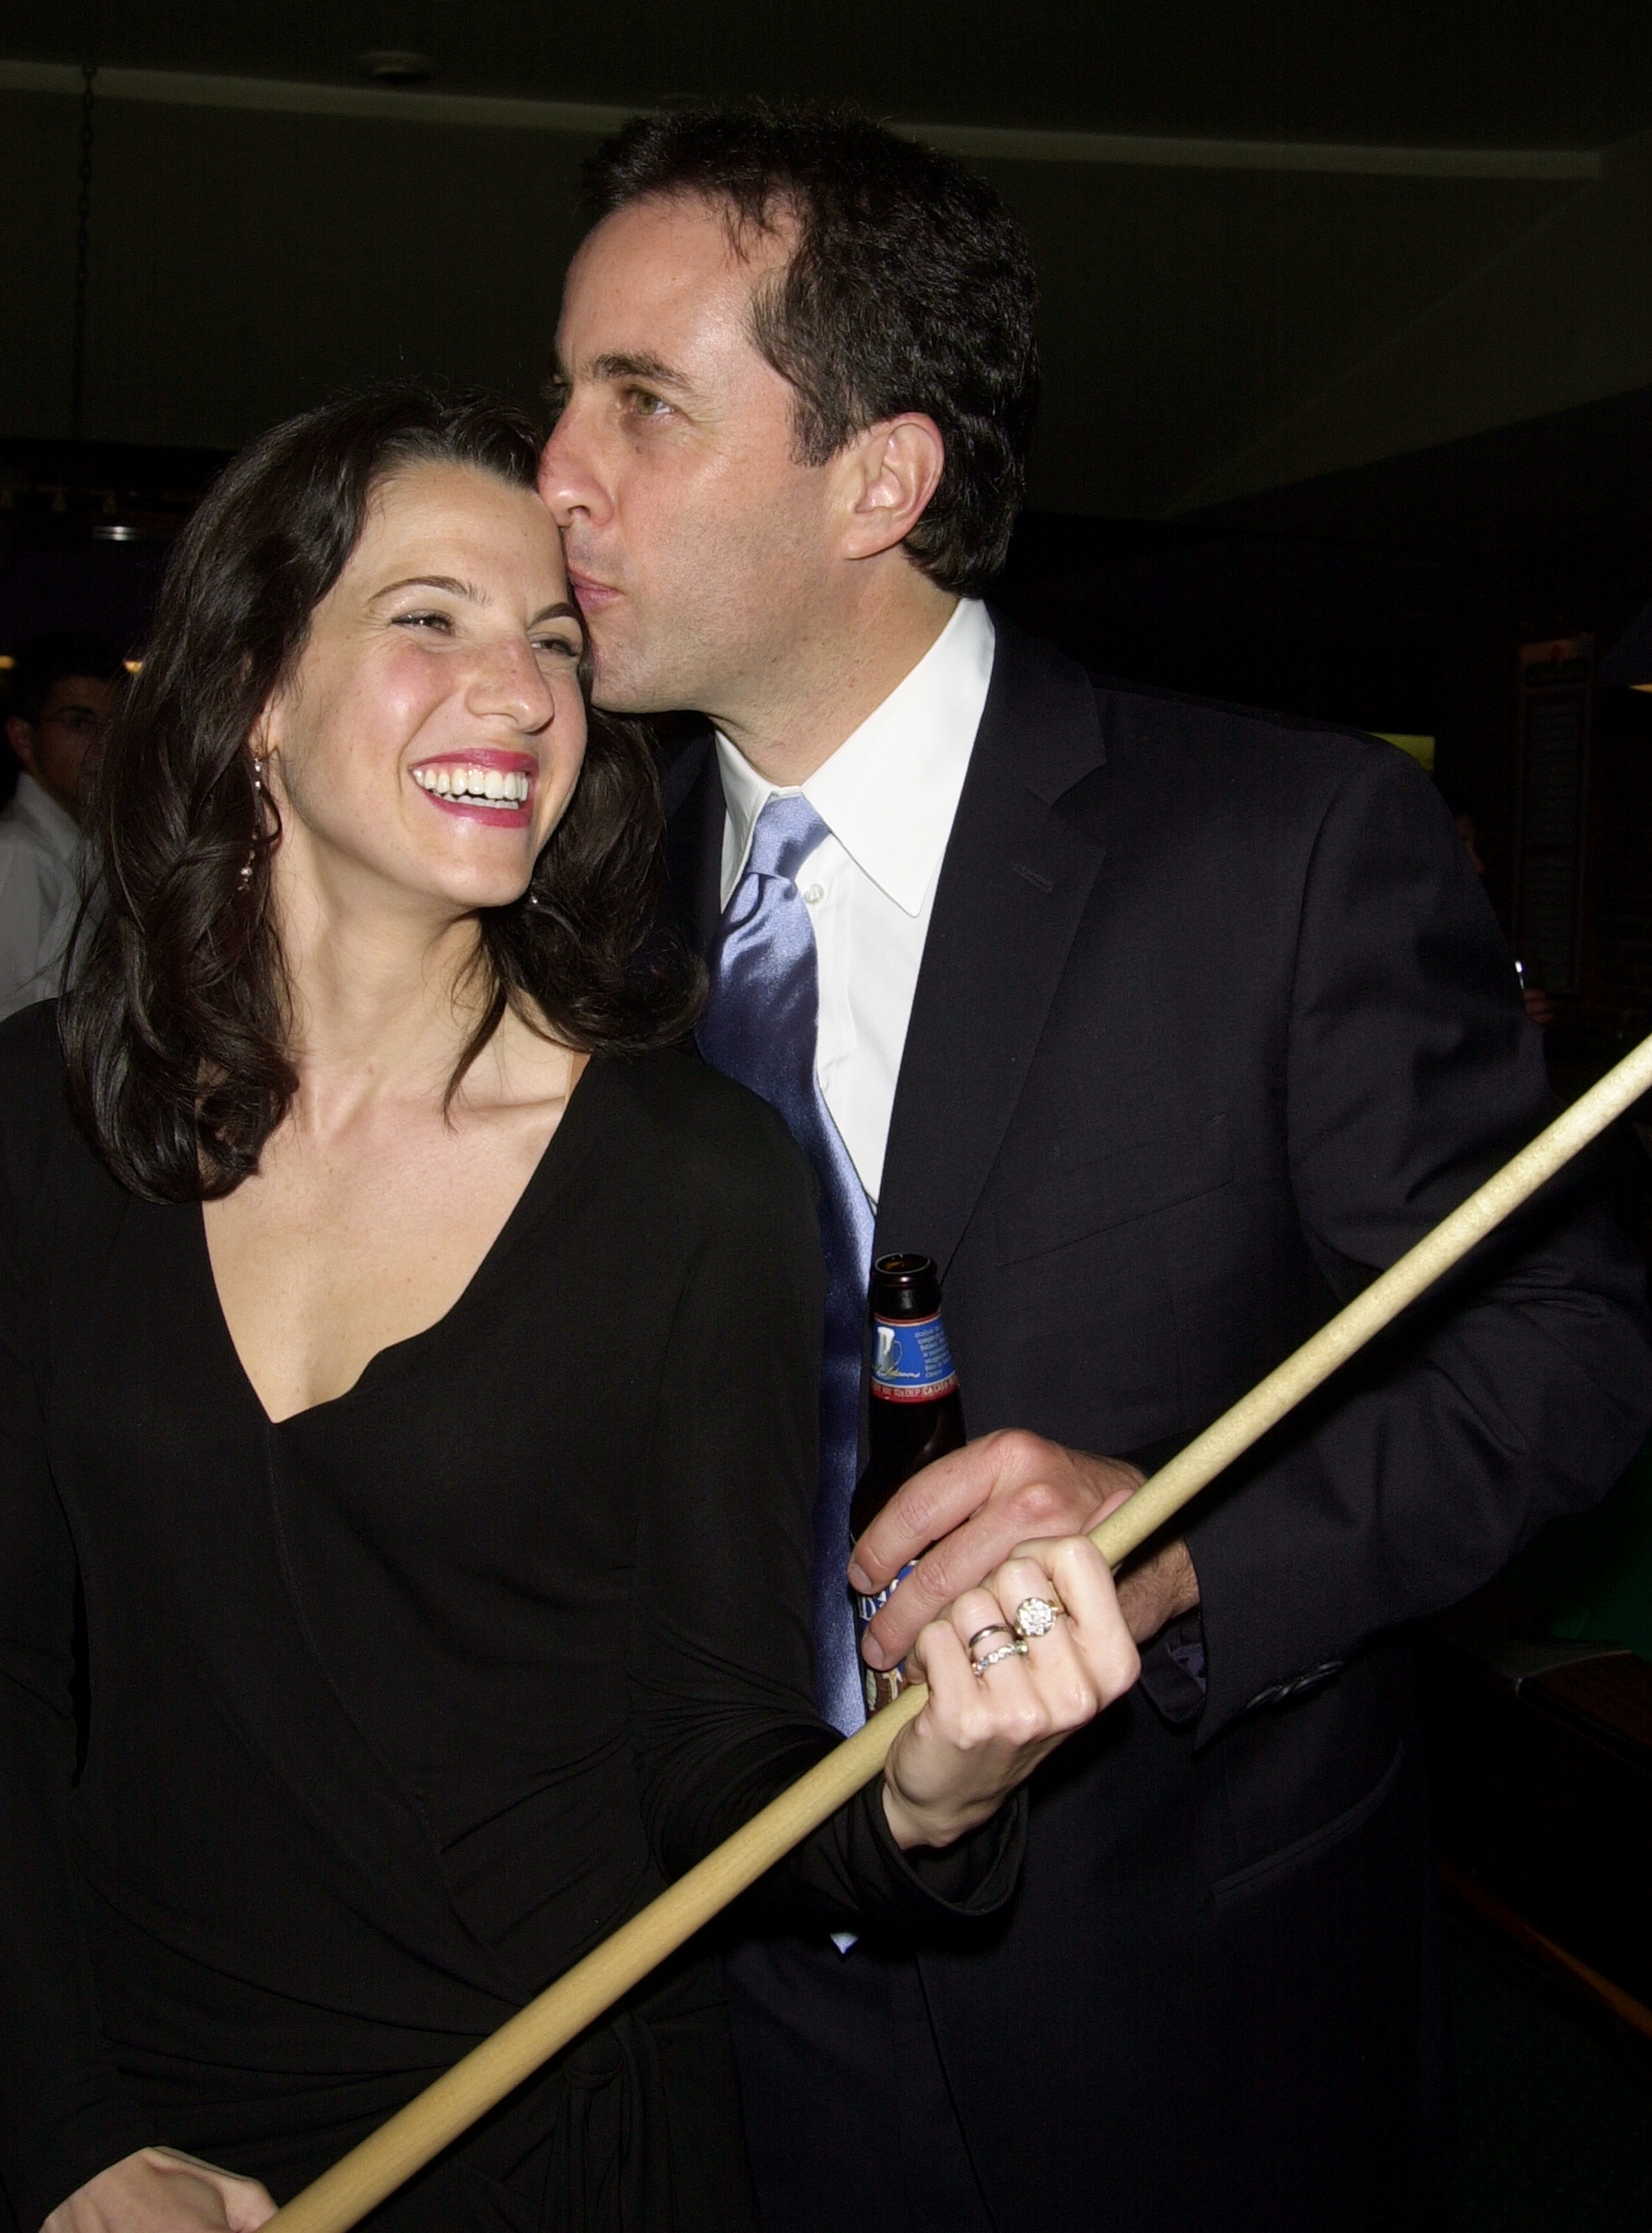 Jerry Seinfeld kisses his wife, Jessica Seinfeld, as she plays pool at the Amsterdam Billiards Club on May 6, 2002 | Source: Getty Images